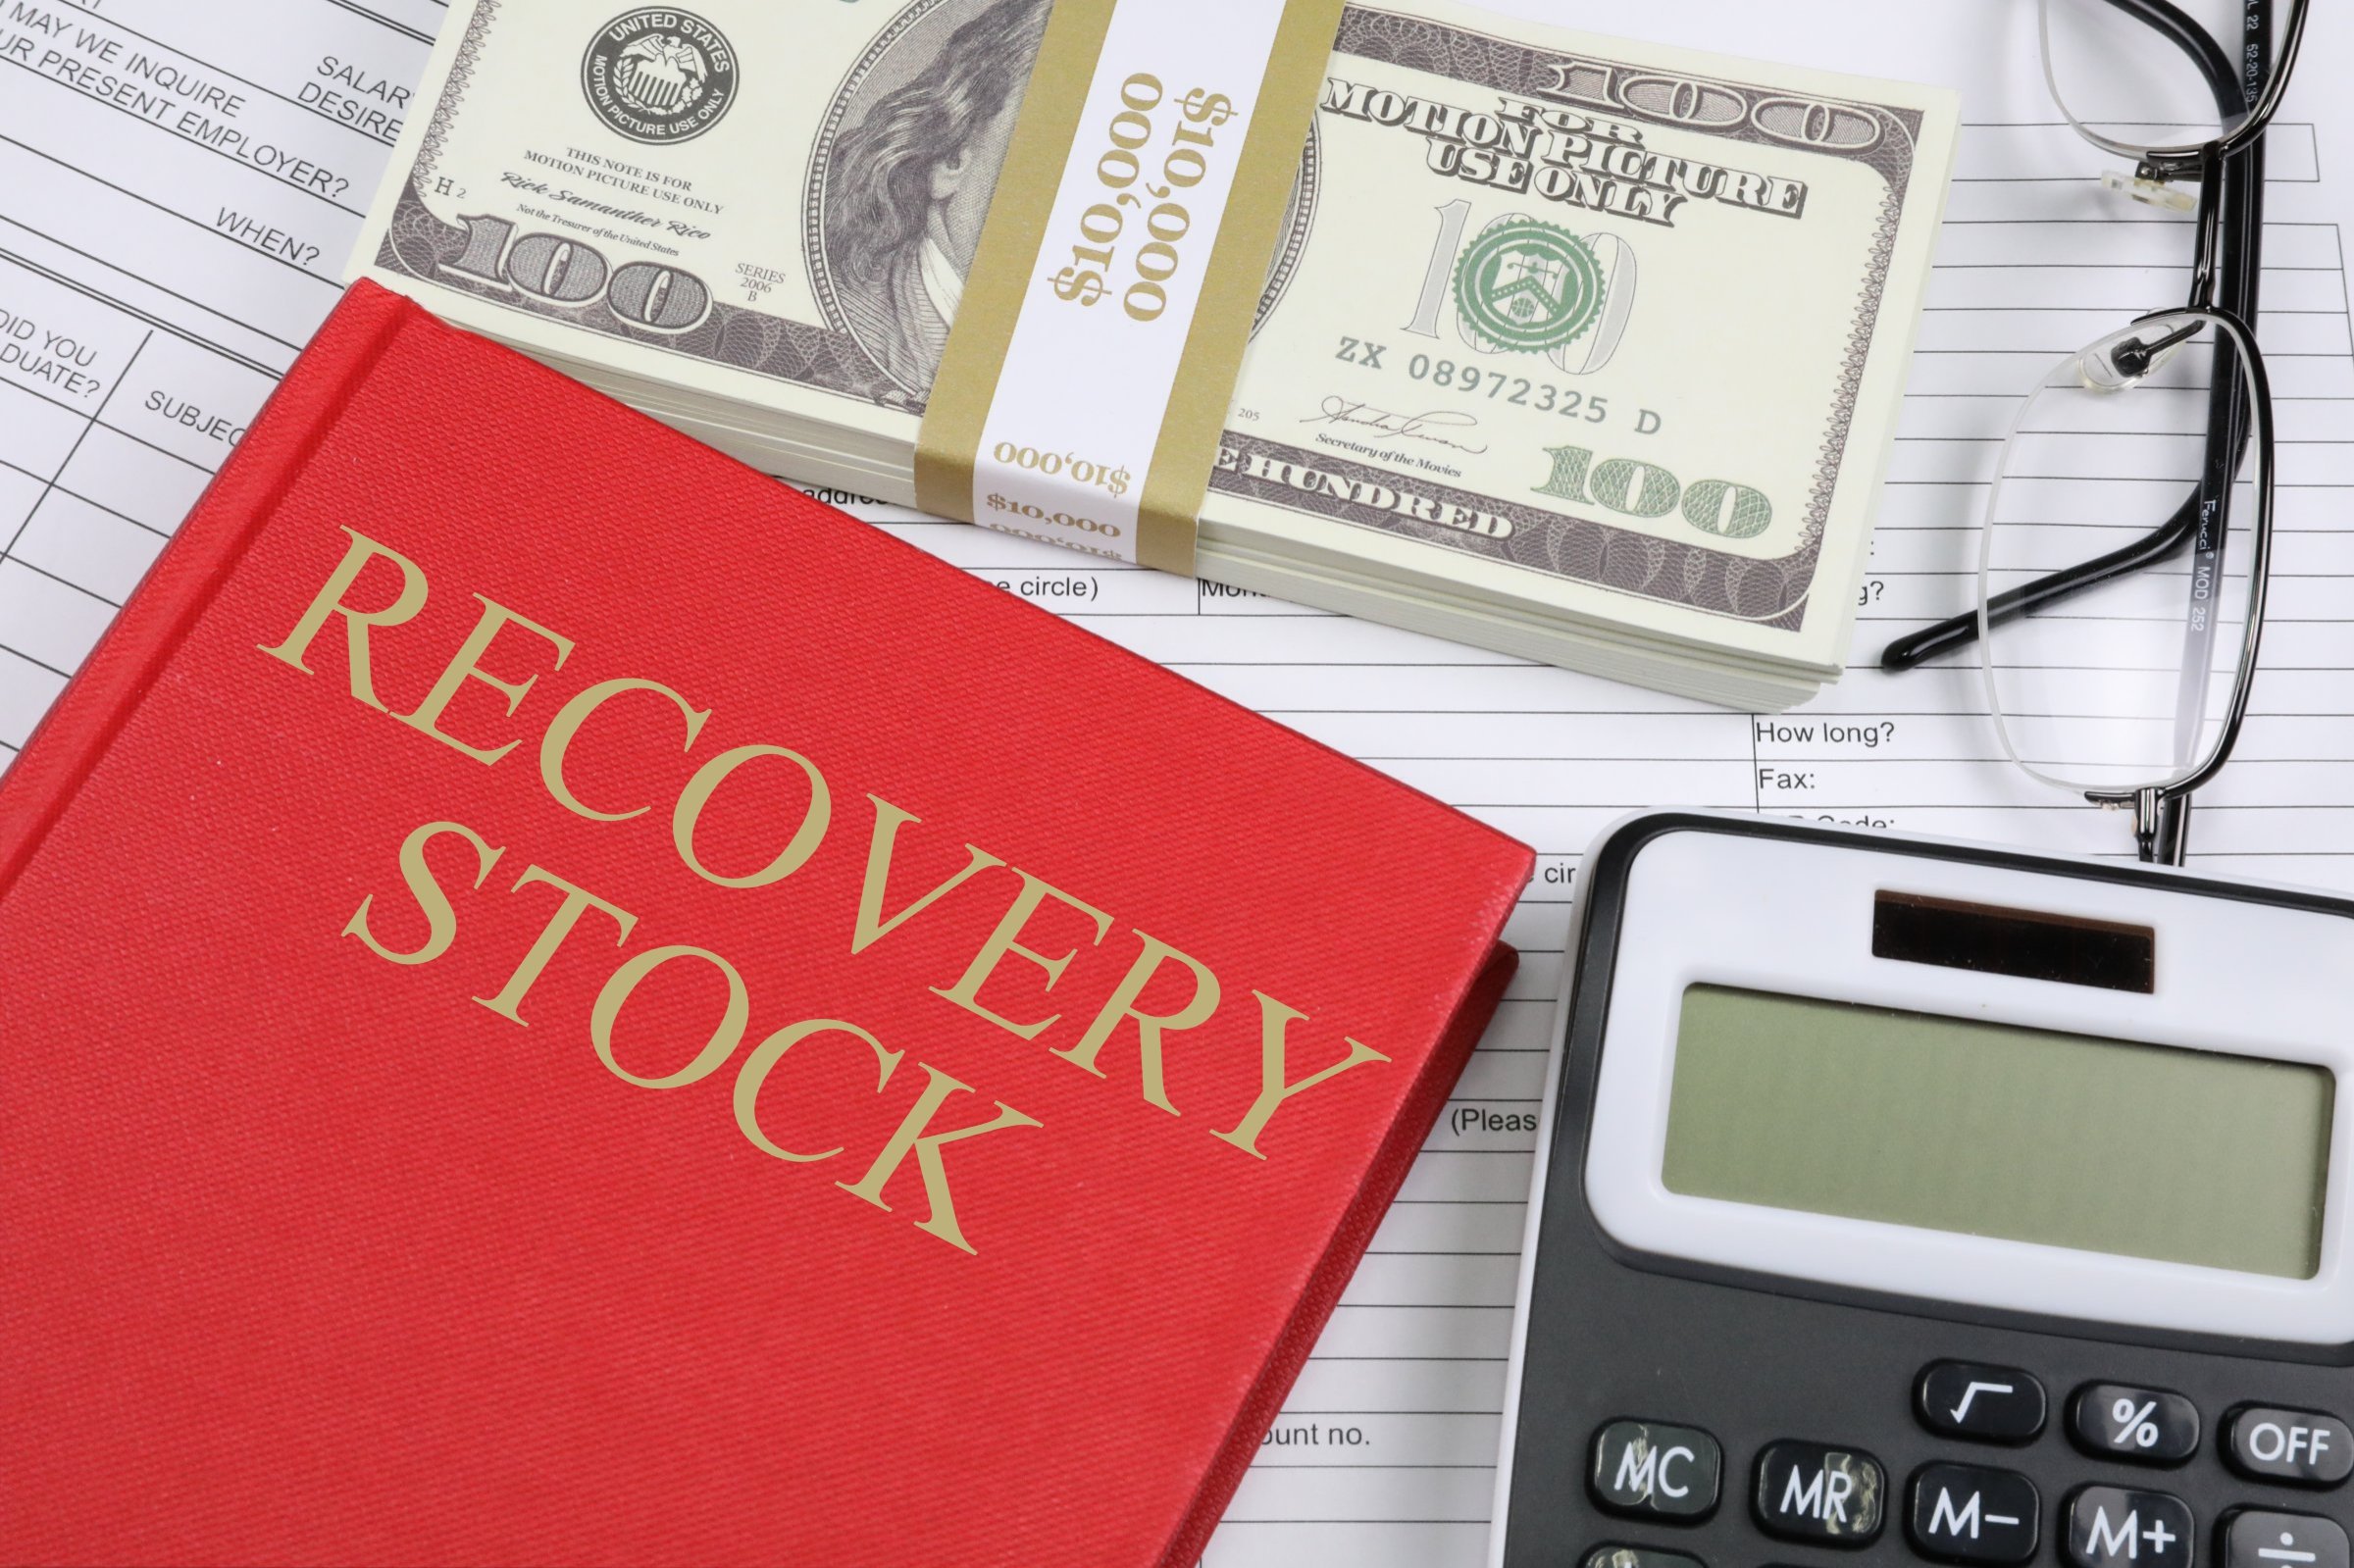 recovery stock